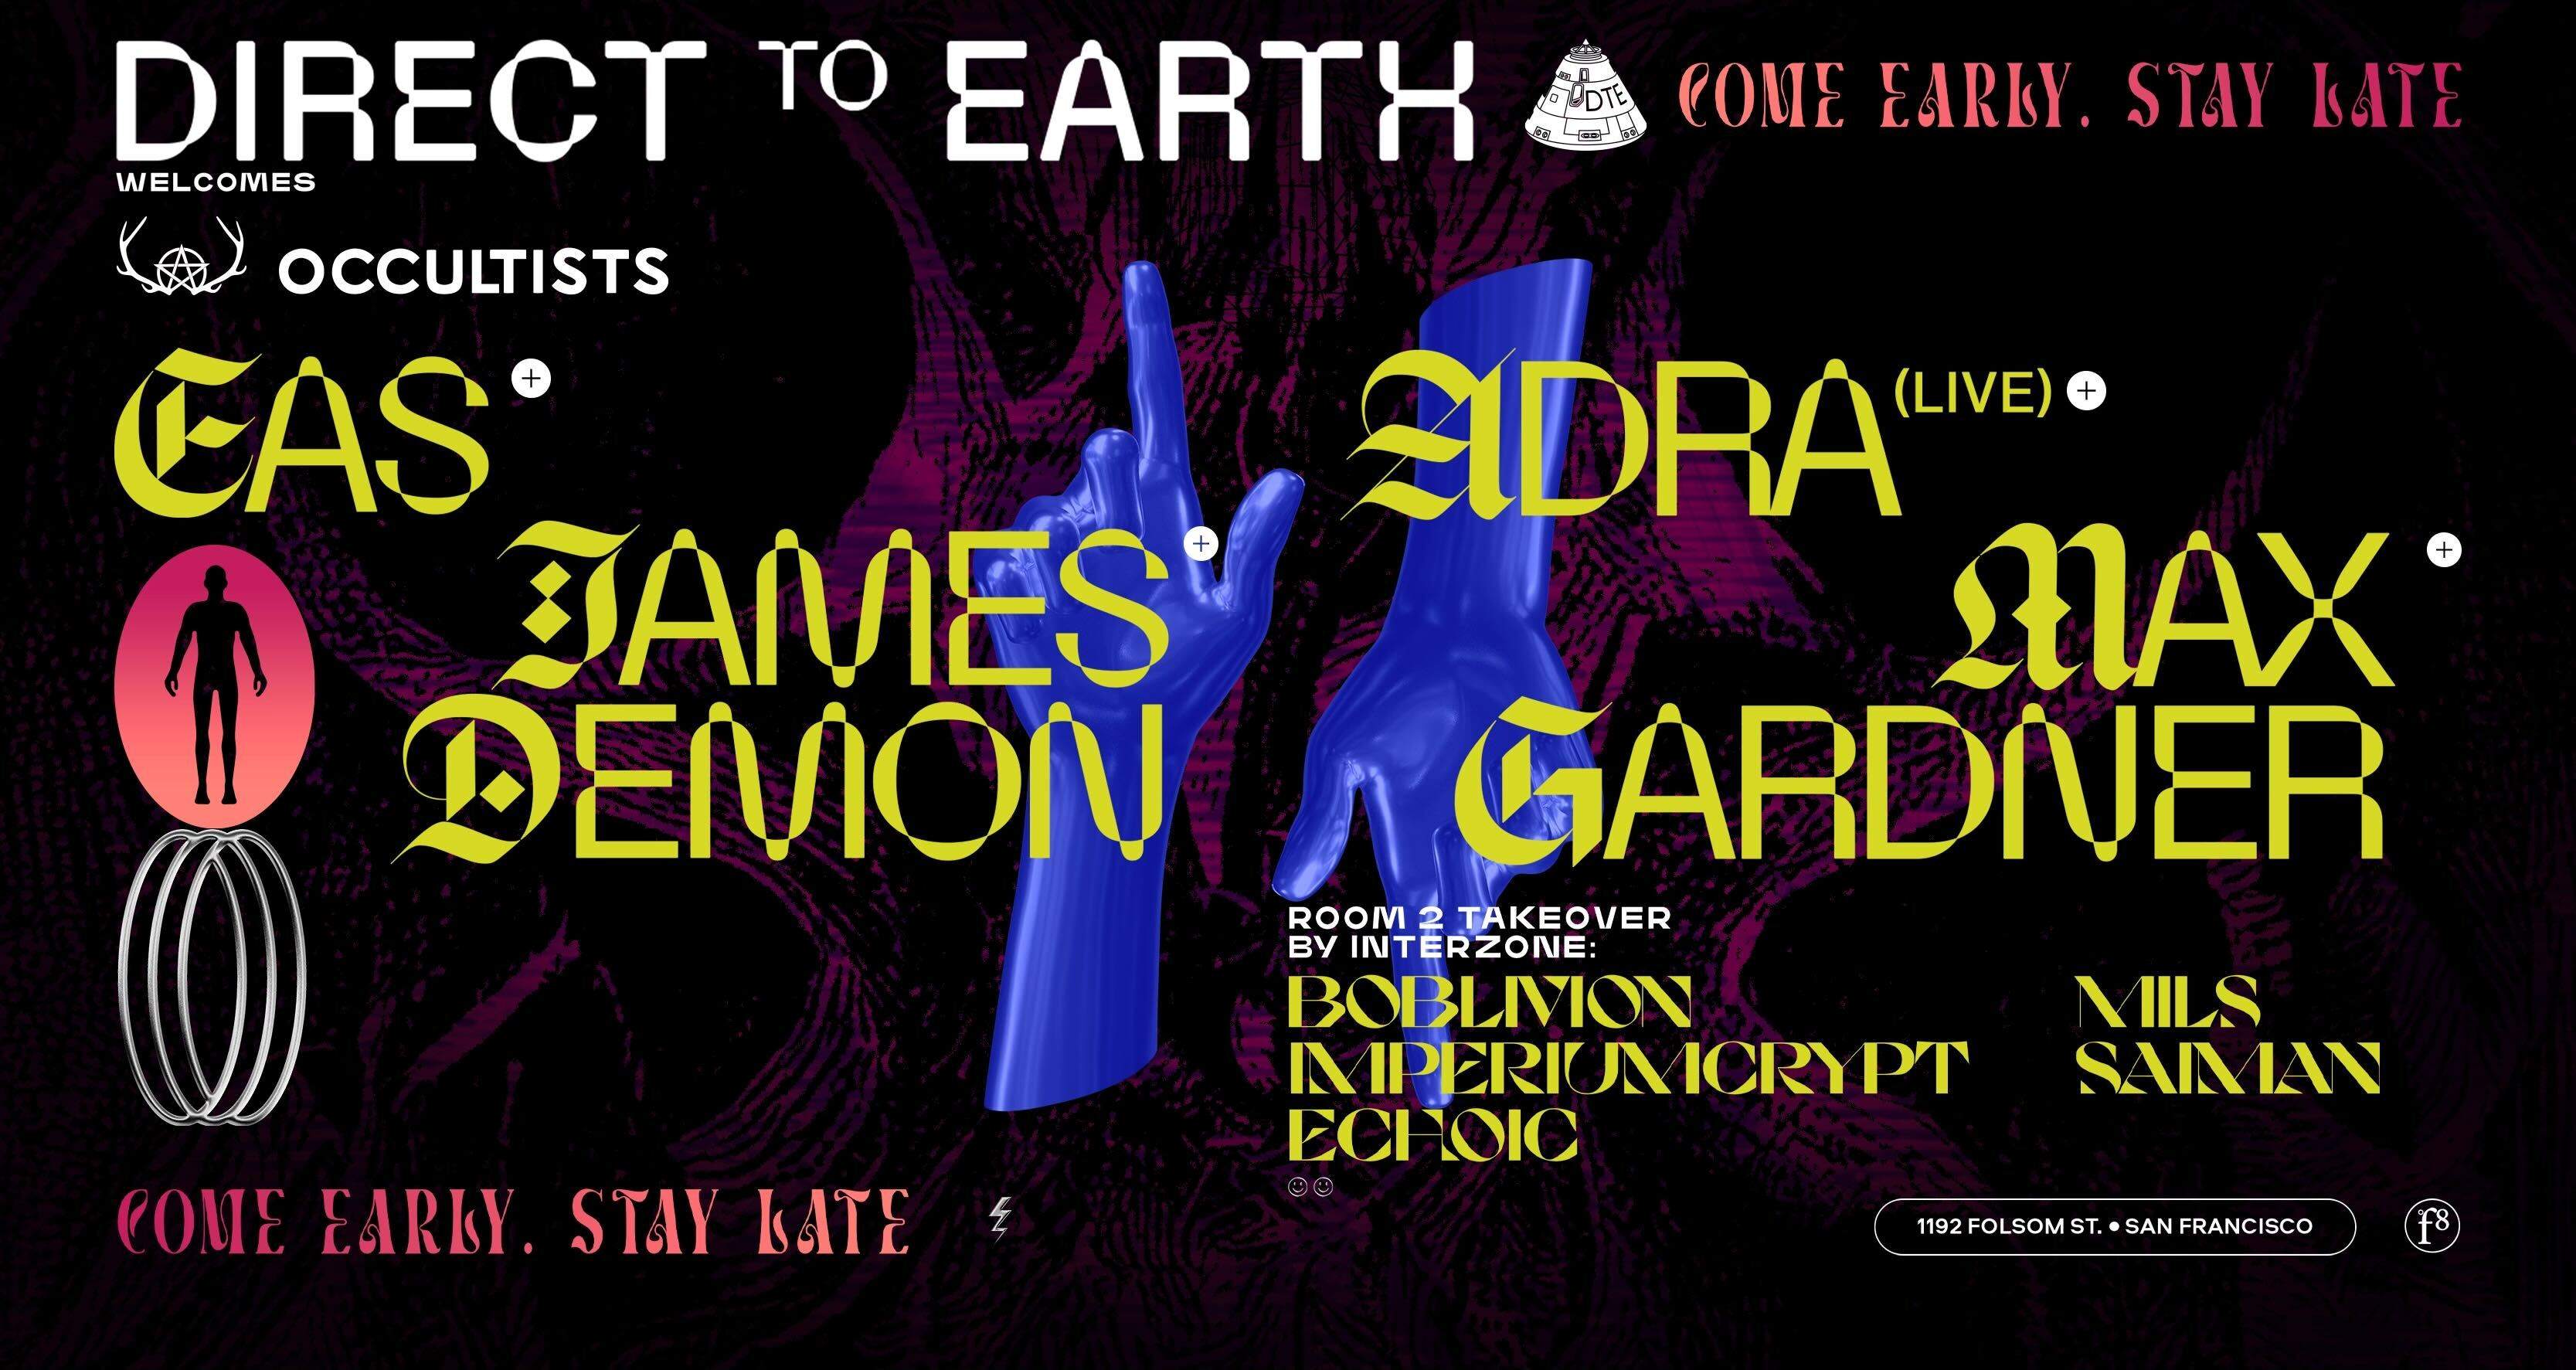 Direct to Earth welcome Occultists with EAS, James Demon, Interzone, Adra (live) & Max Gardner - フライヤー裏